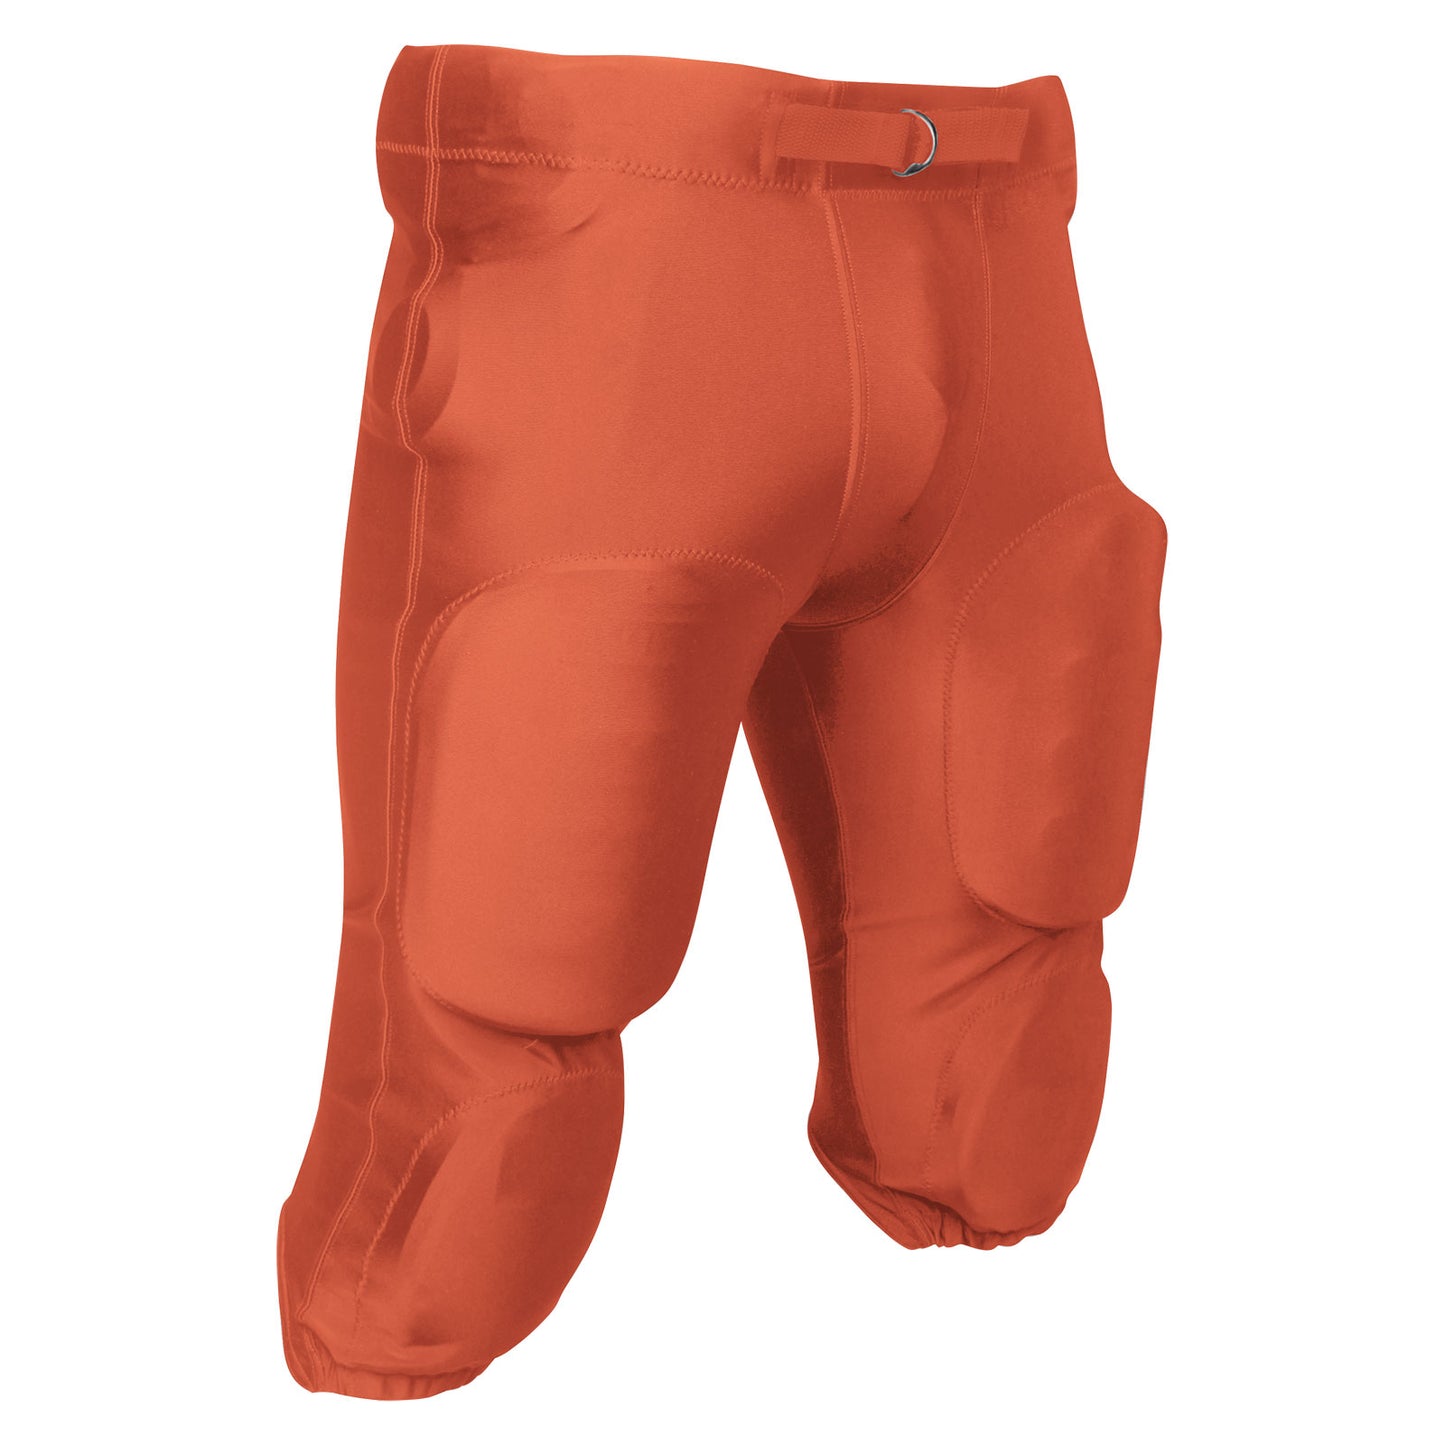 Traditional Football Pant With Pad Pockets ORANGE BODY